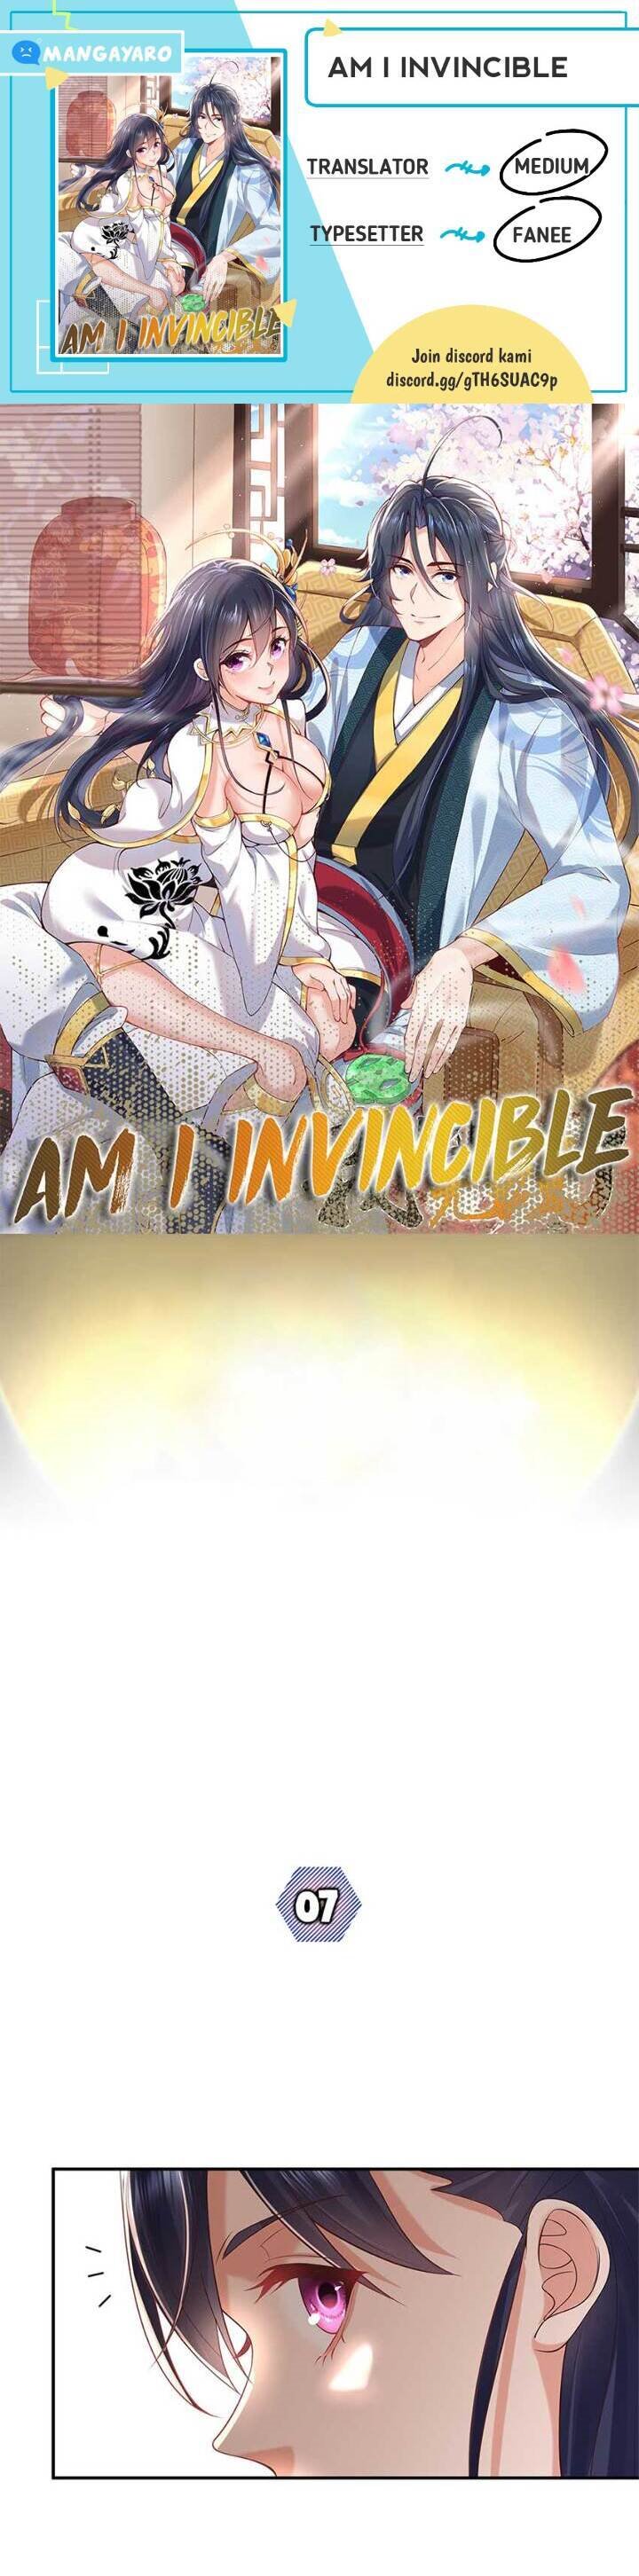 Am I Invincible Chapter 7